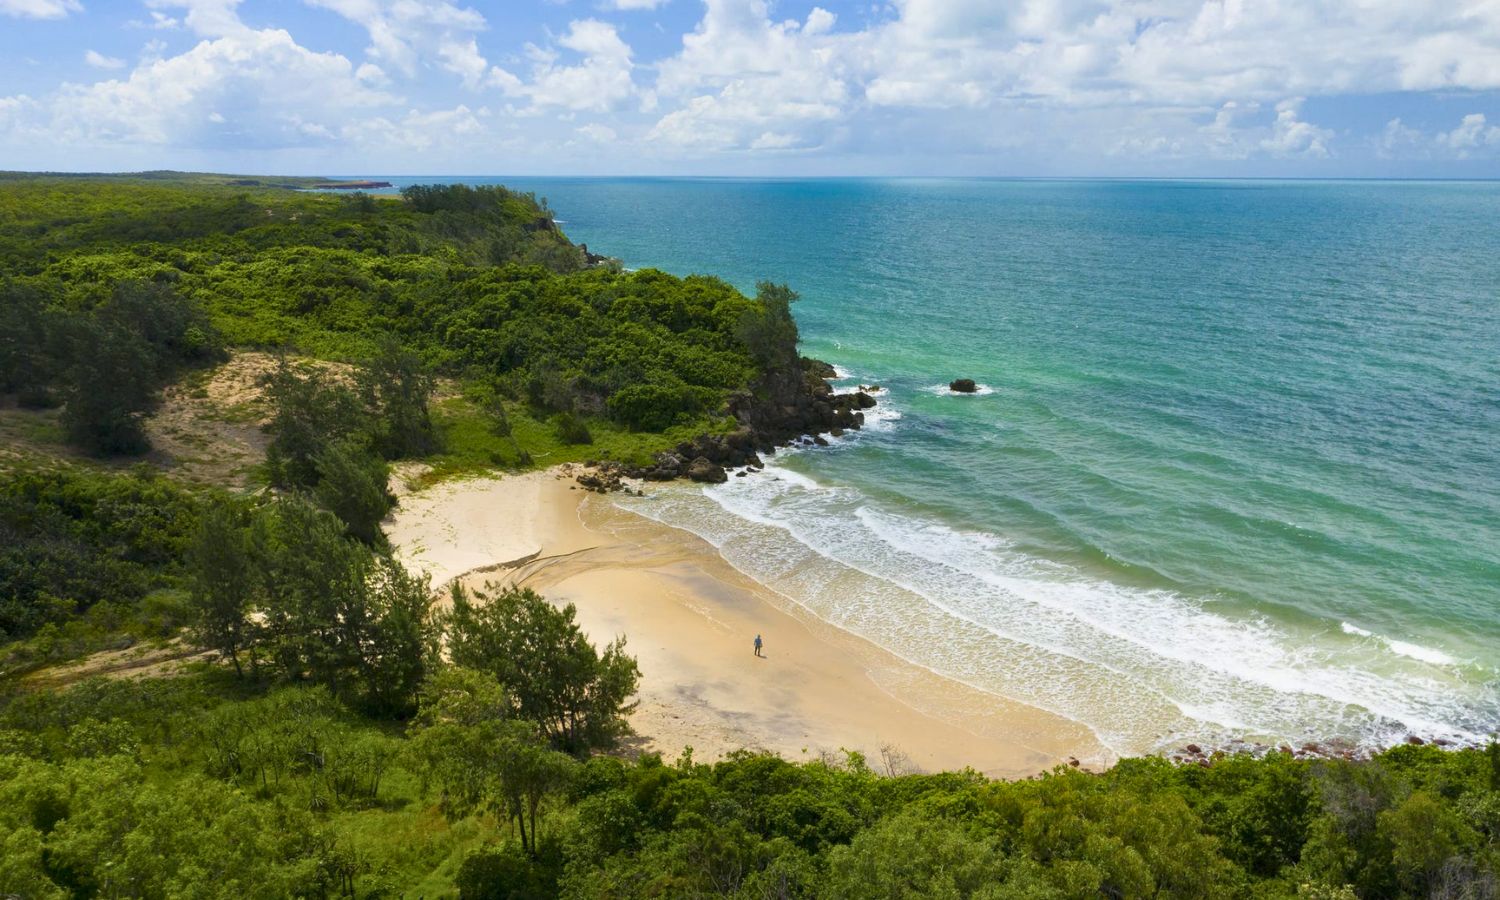 An image of one of the best beaches in the northern territory